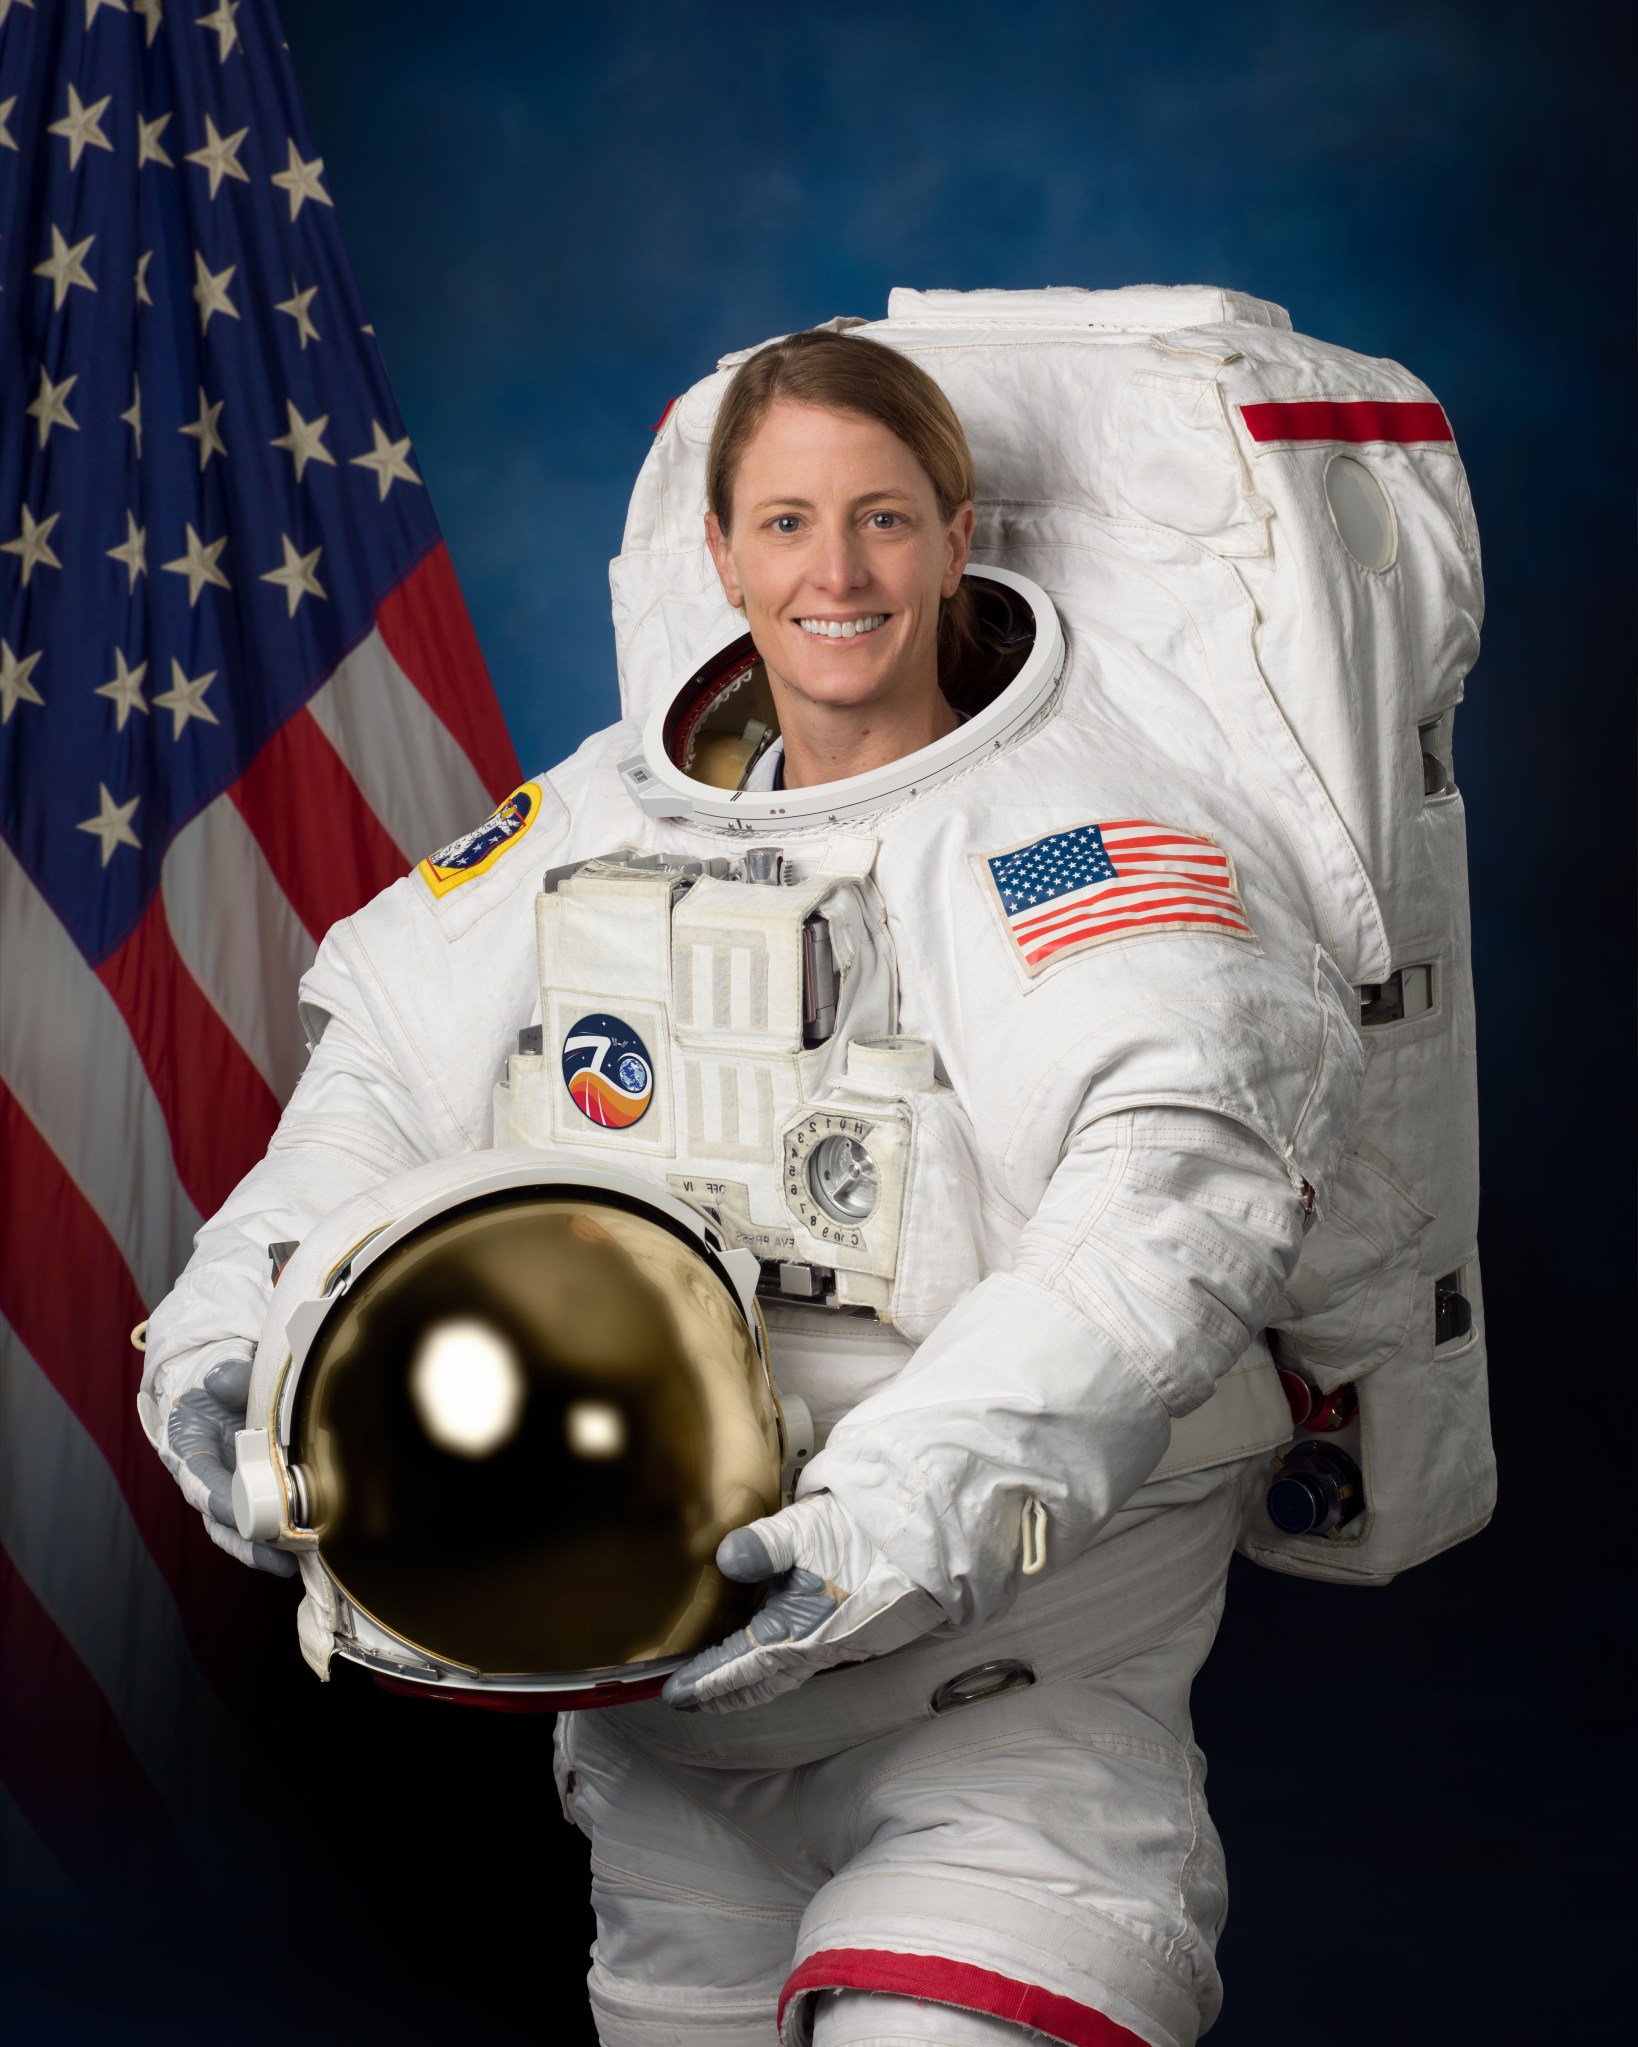 Official portrait of NASA astronaut and Expedition 70 Flight Engineer Loral O'Hara.